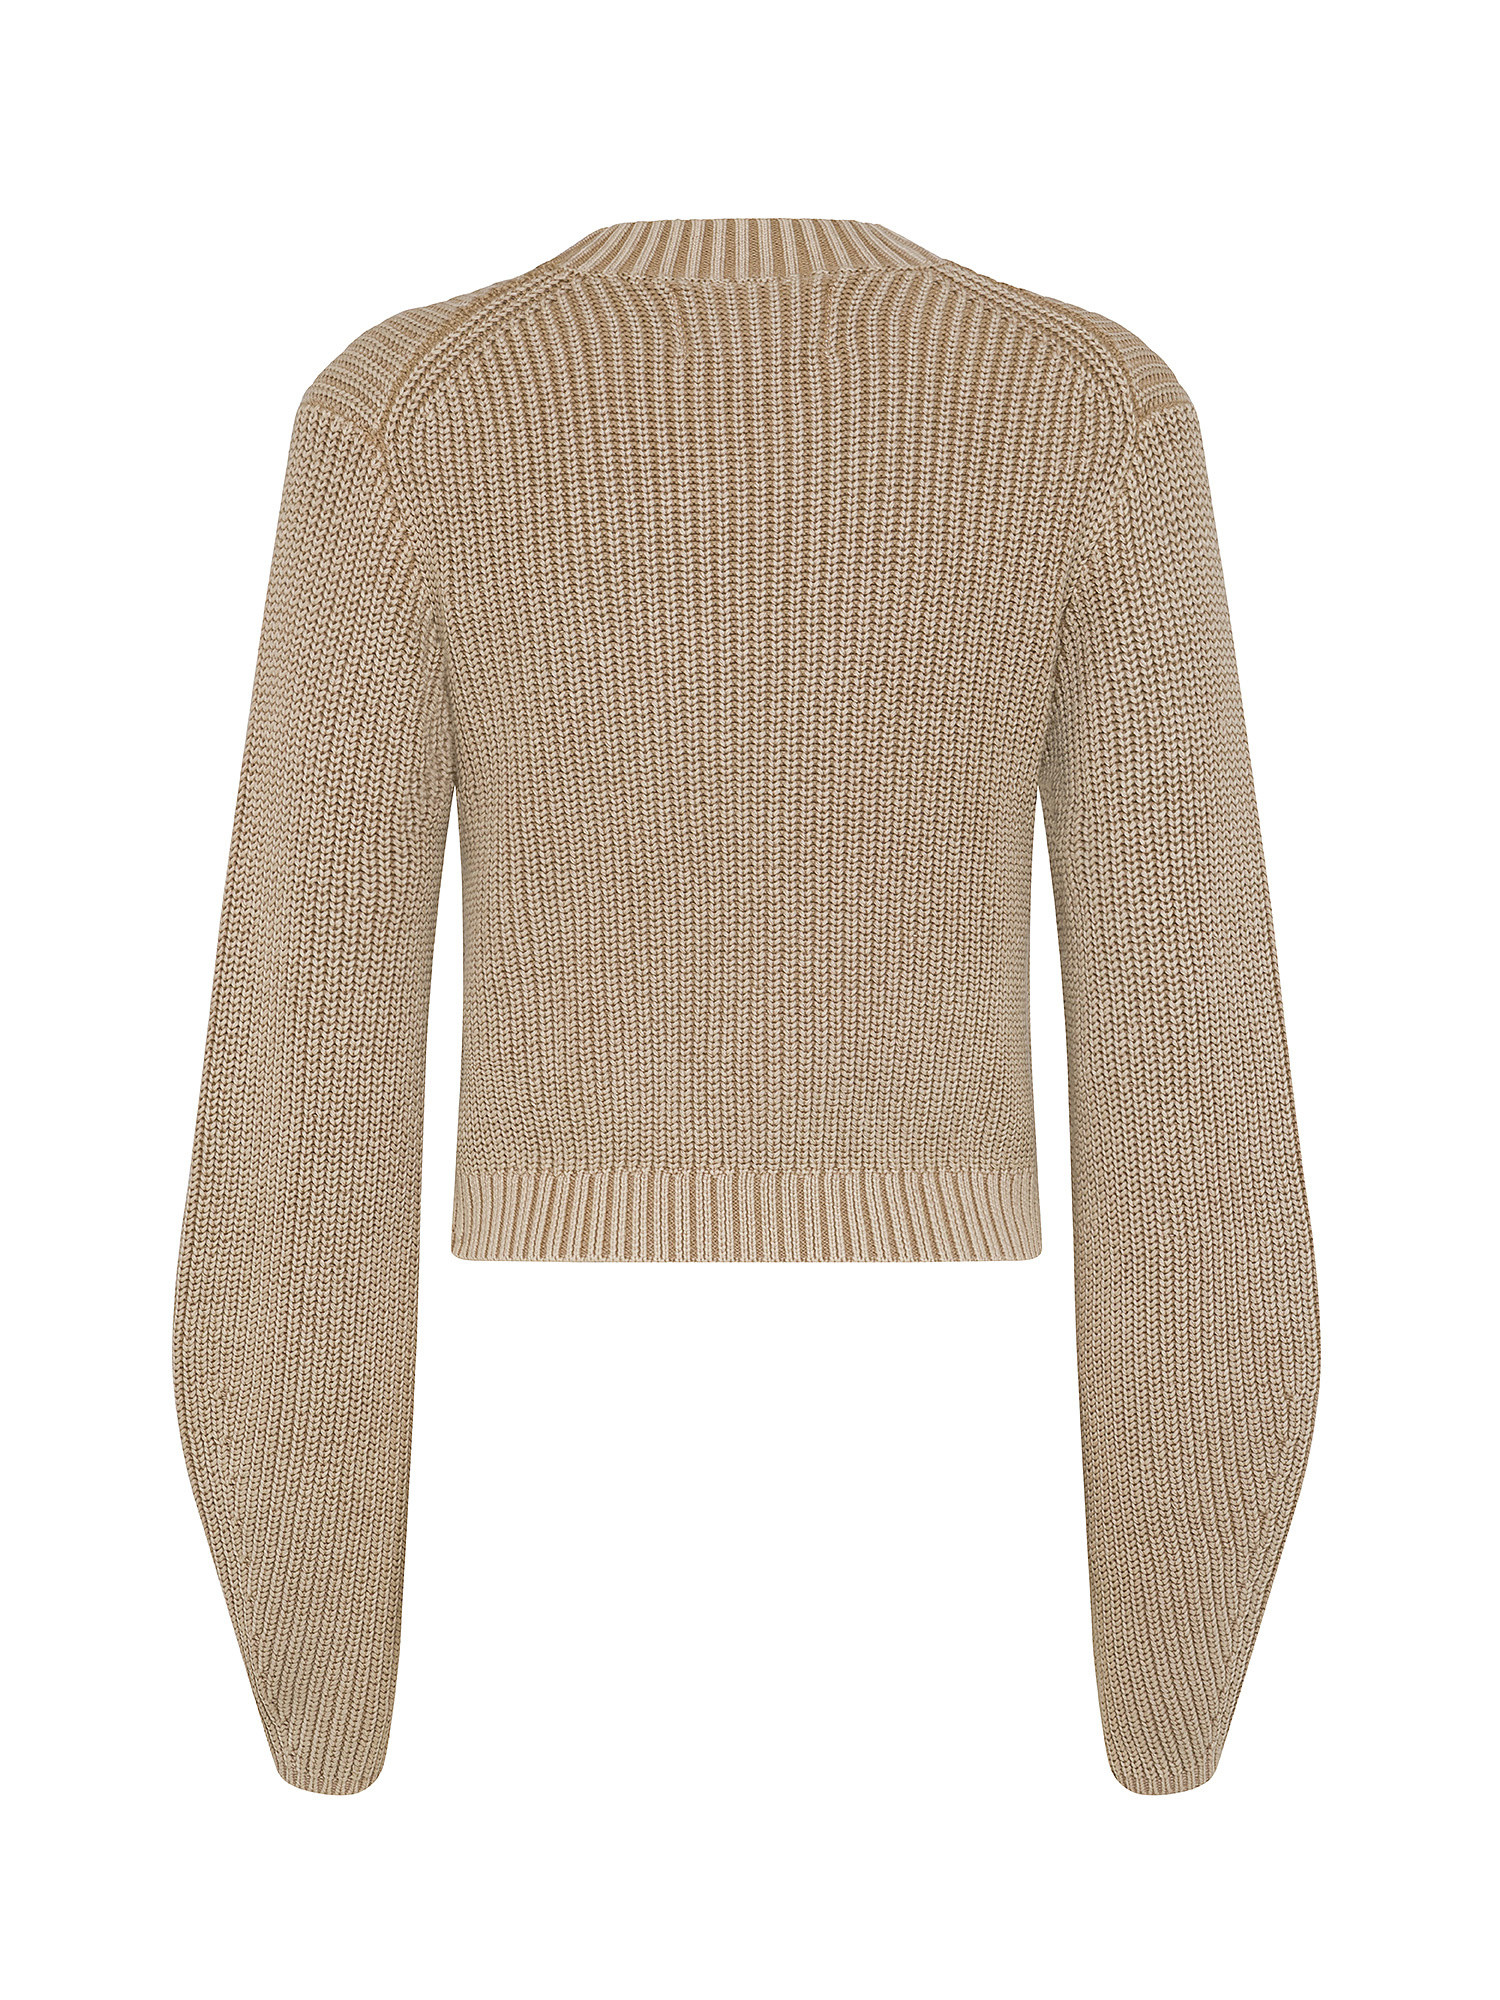 Calvin Klein Jeans - Crew neck cotton sweater with logo, Beige, large image number 1